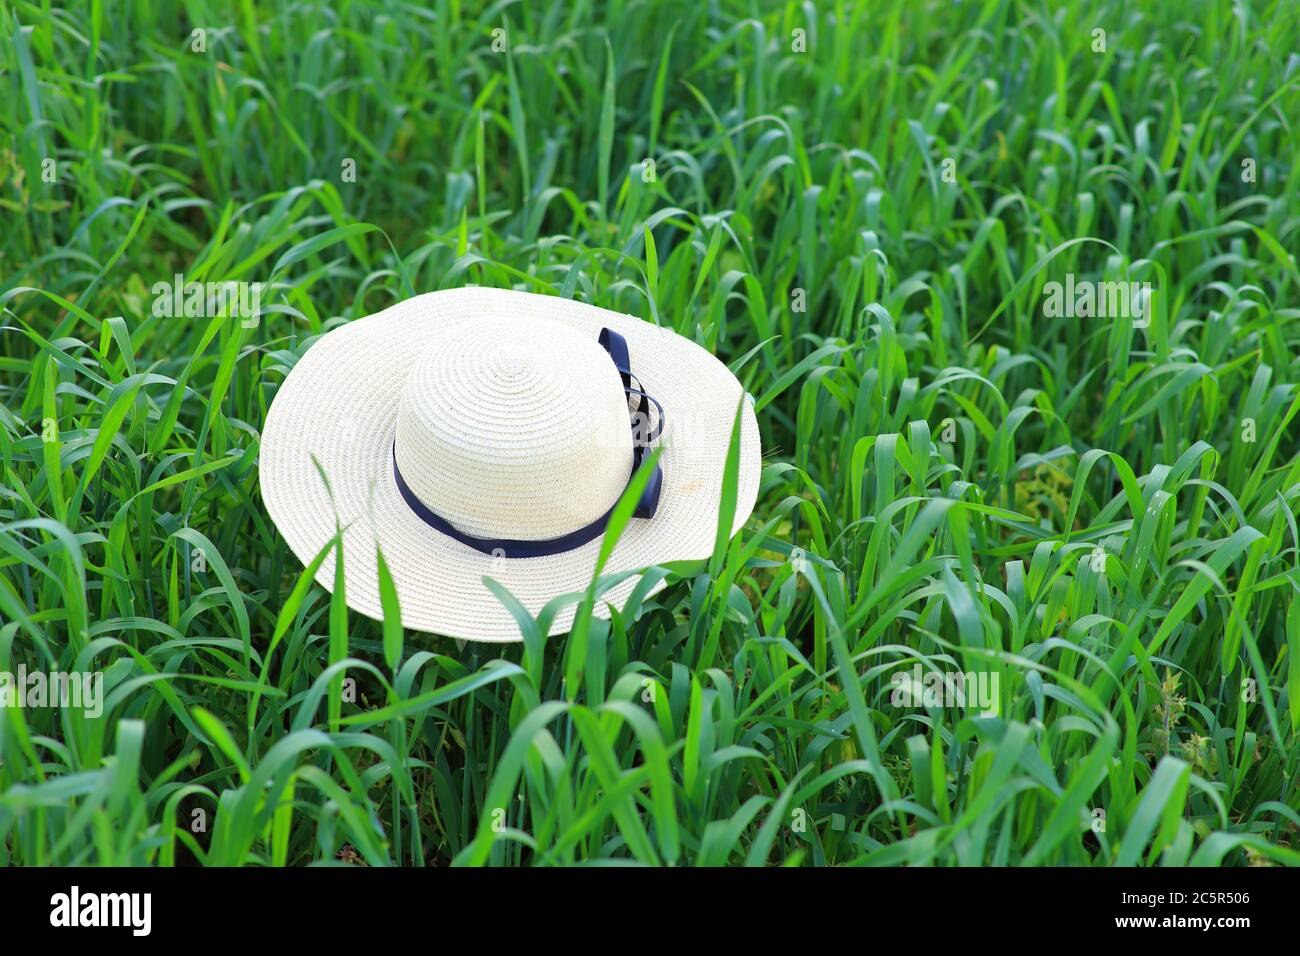 Big bright hat lies on the green grass in the field Stock Photo